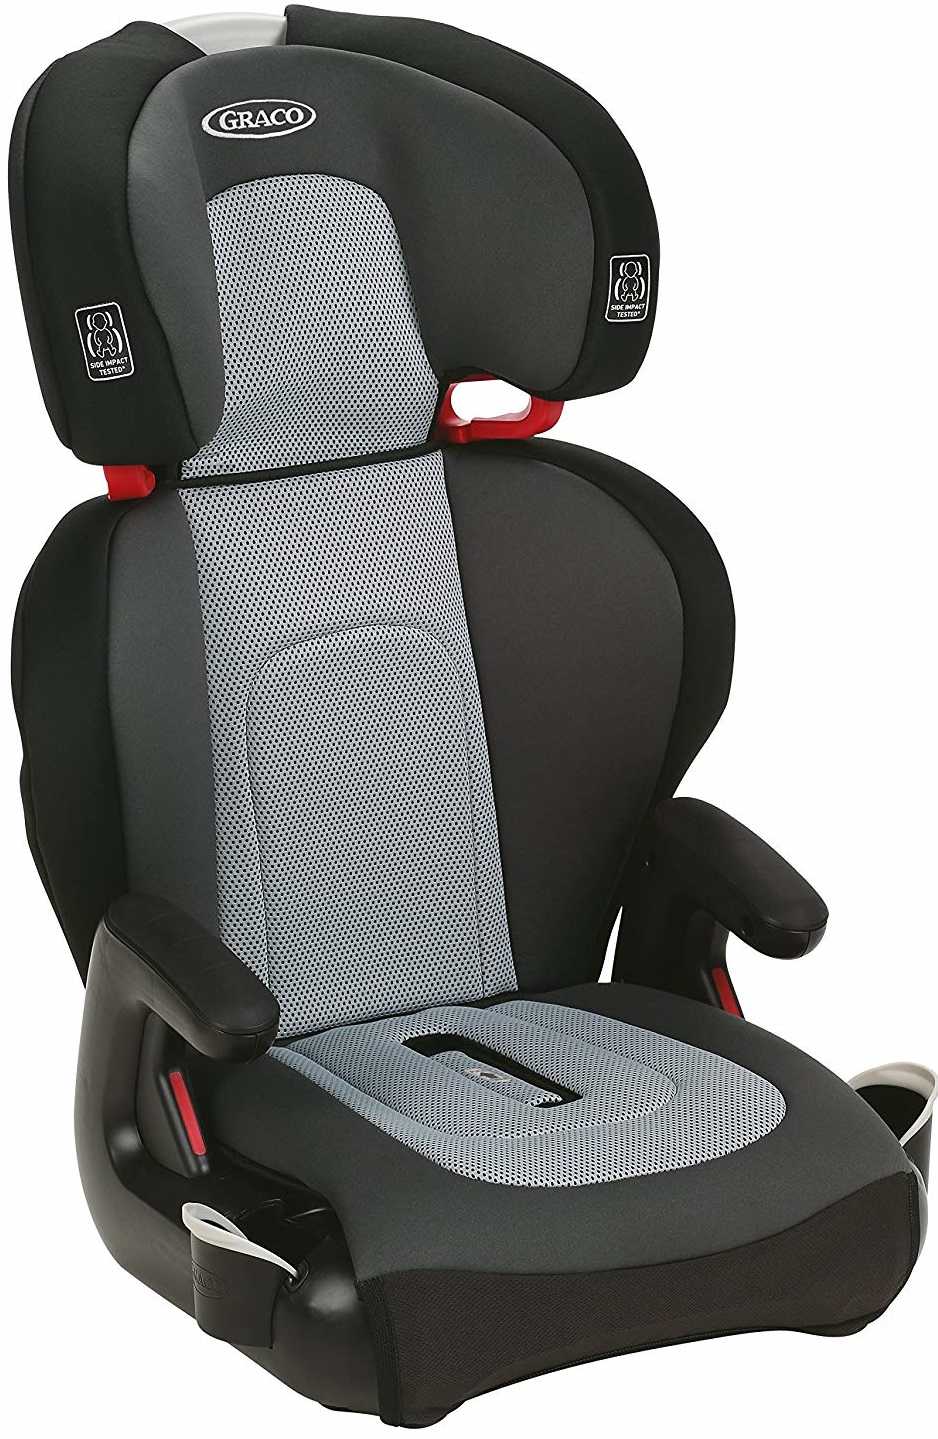 graco turbobooster lx backless booster seat